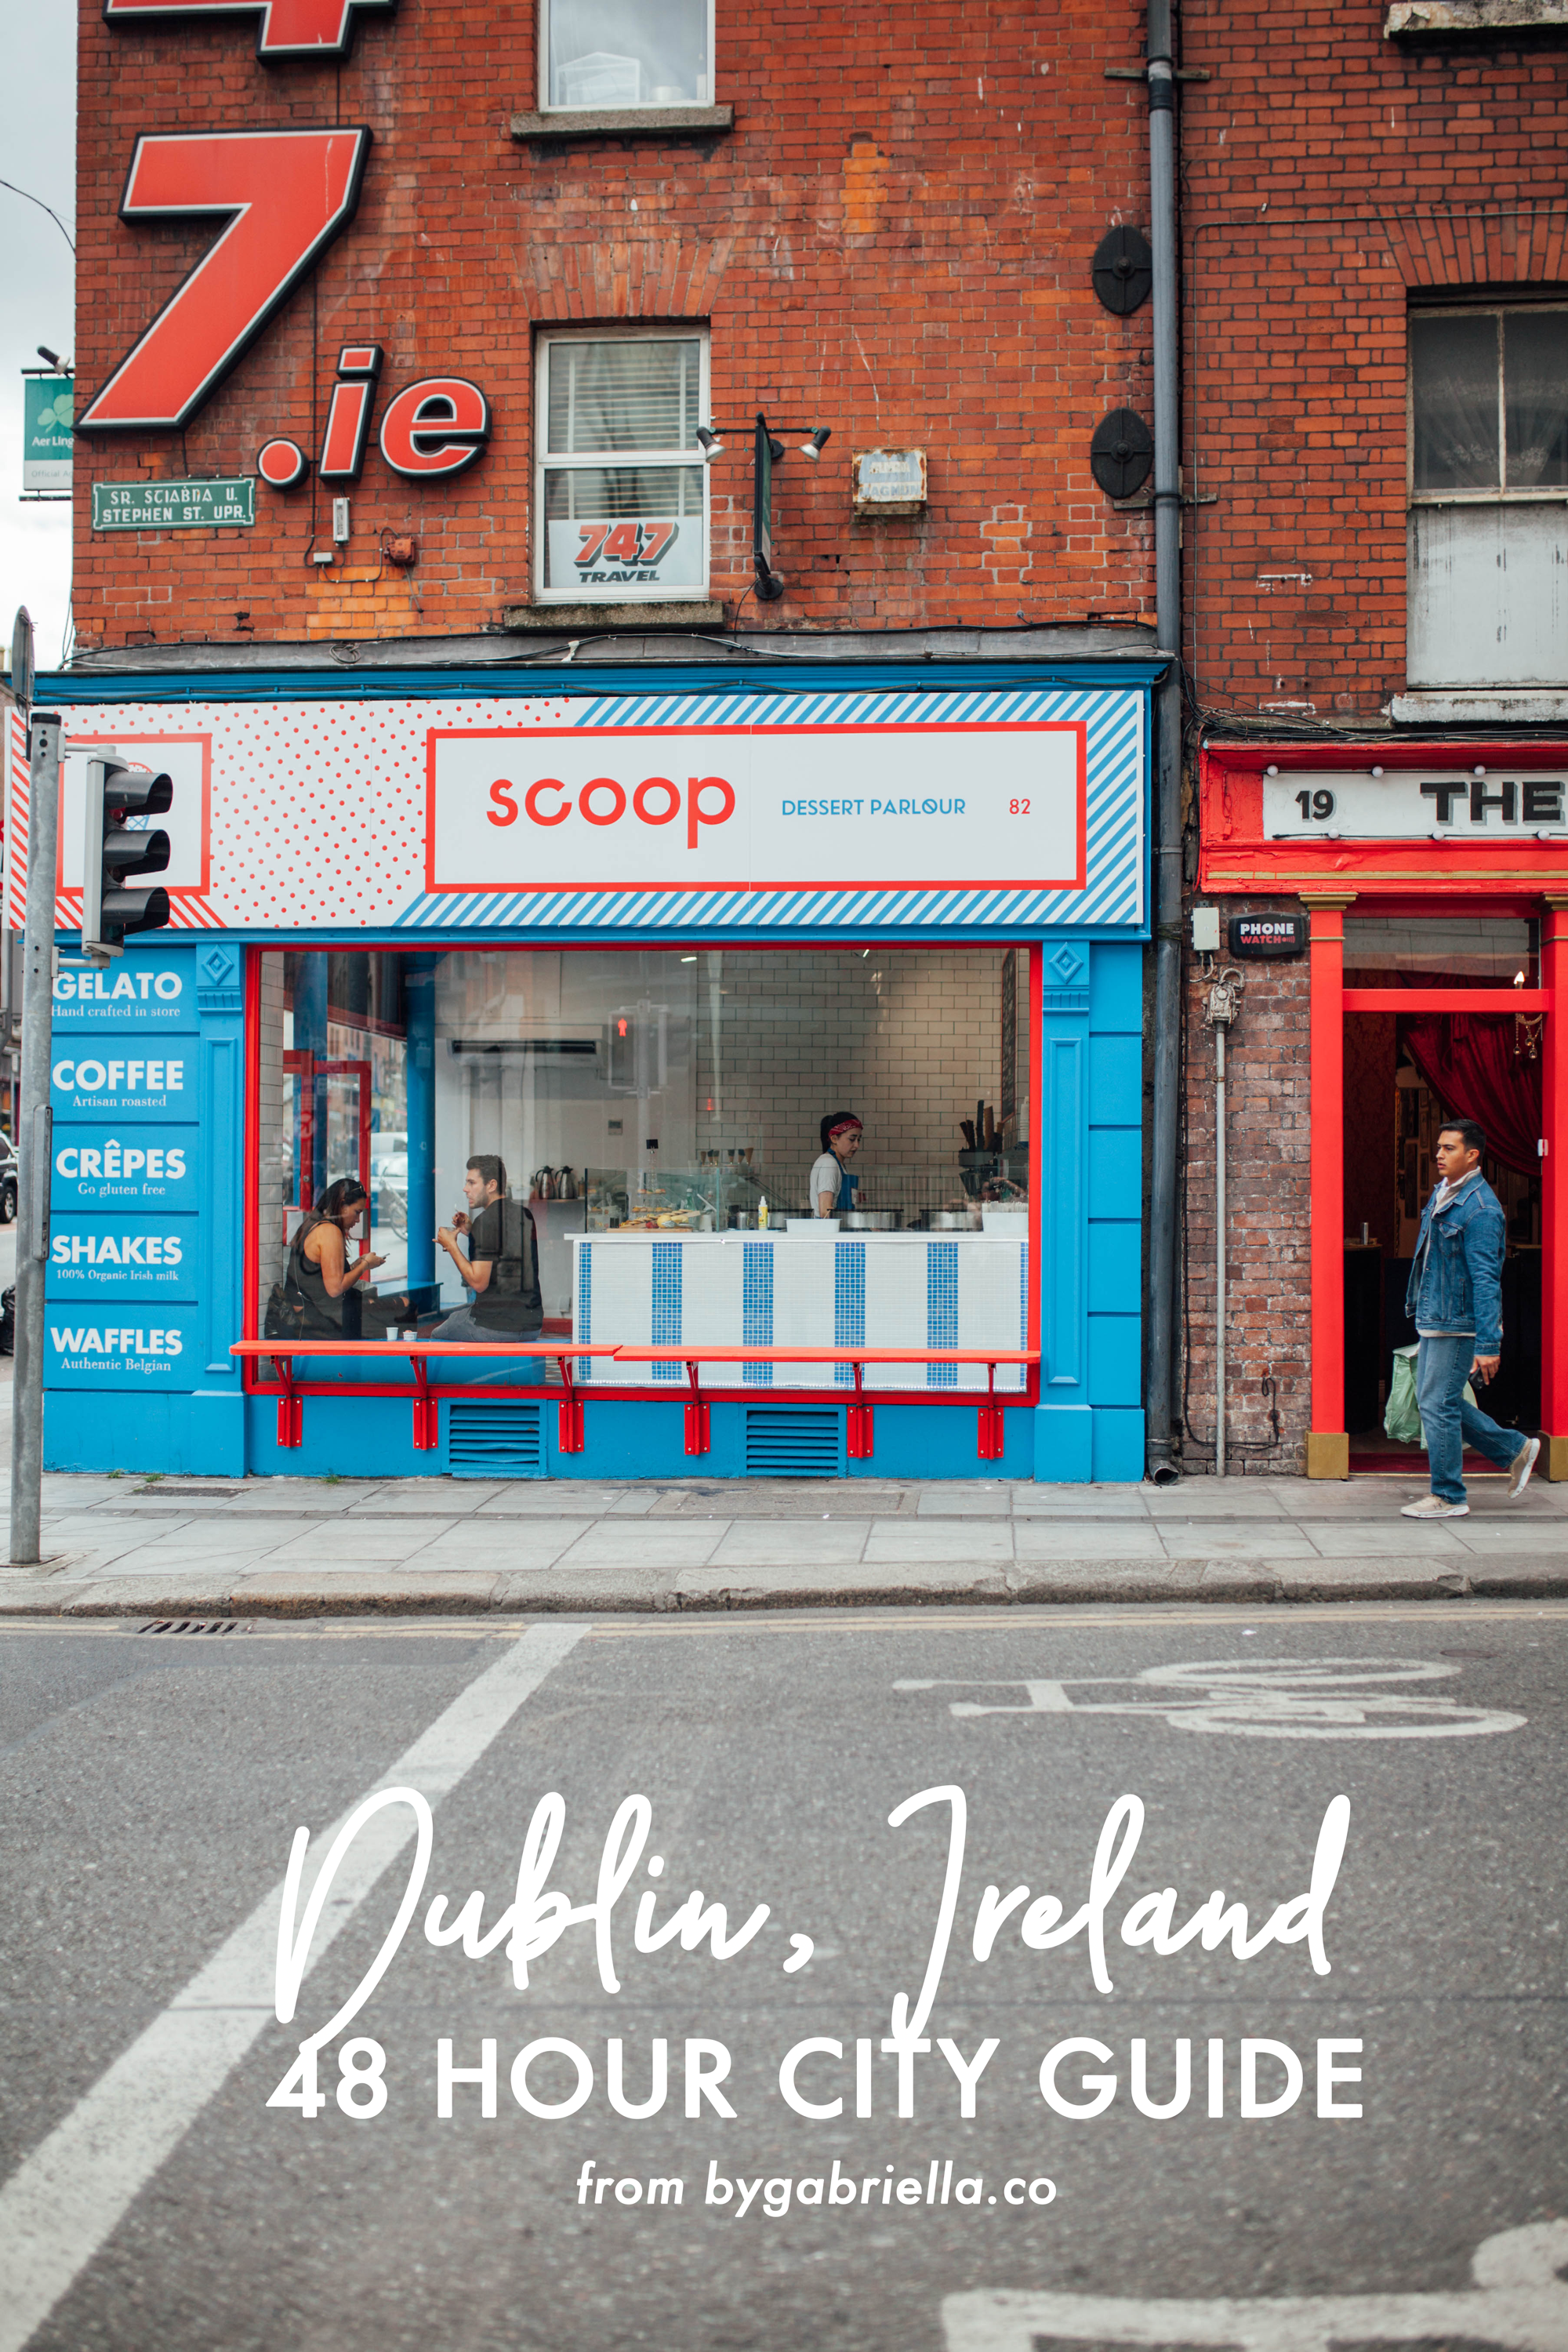 Dublin, Ireland: 48 hour city guide with recommendations for where to eat, where to stay, where to drink, and more! #ad | bygabriella.co